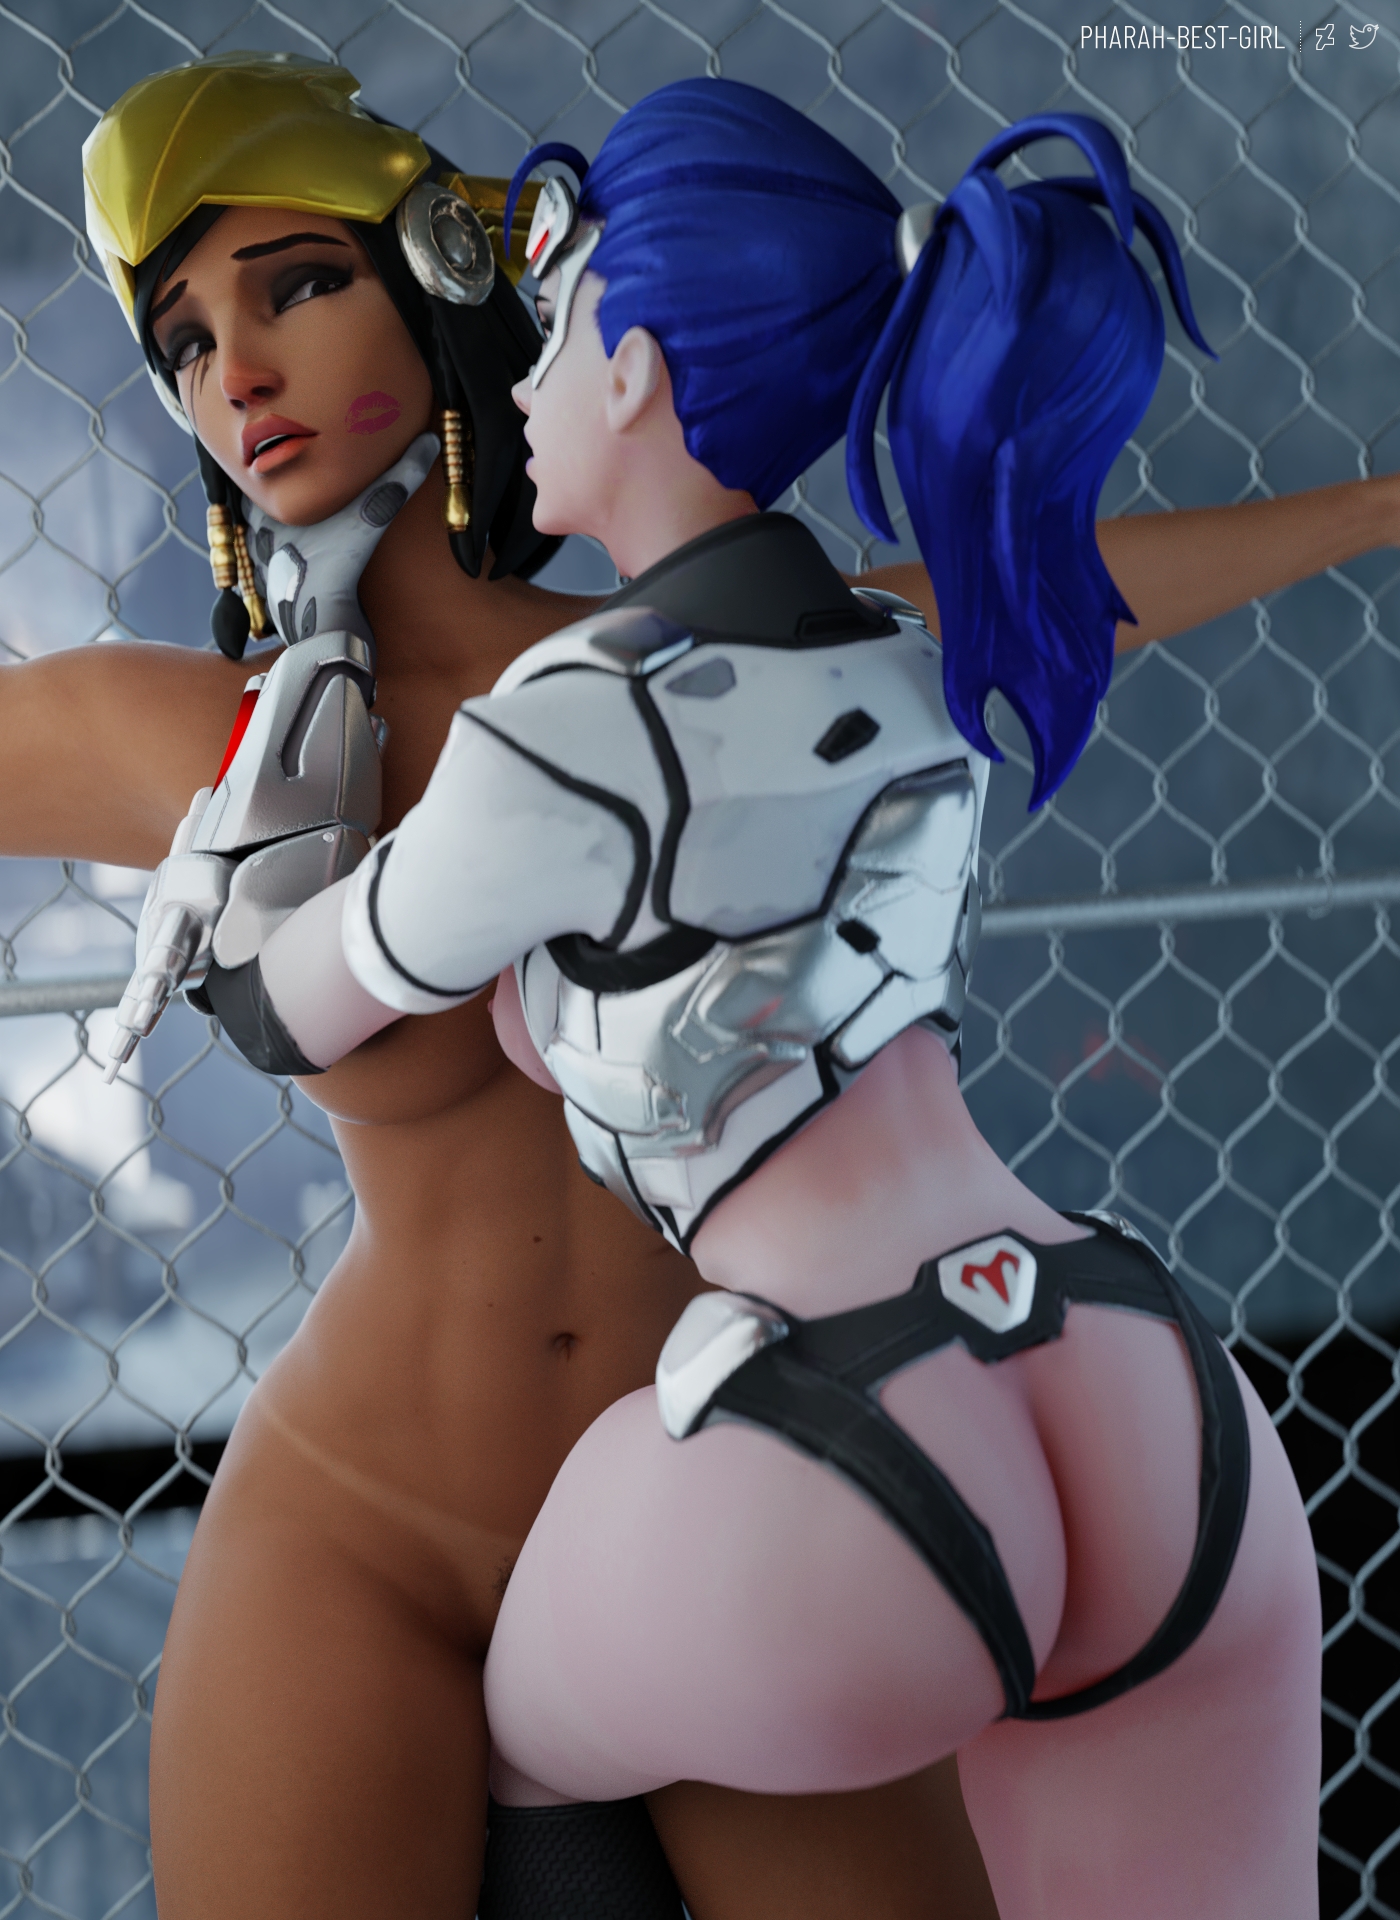 The spider catches its prey Pharah Overwatch Widowmaker 3d Porn Sexy Nude Muscular Girl Lesbian